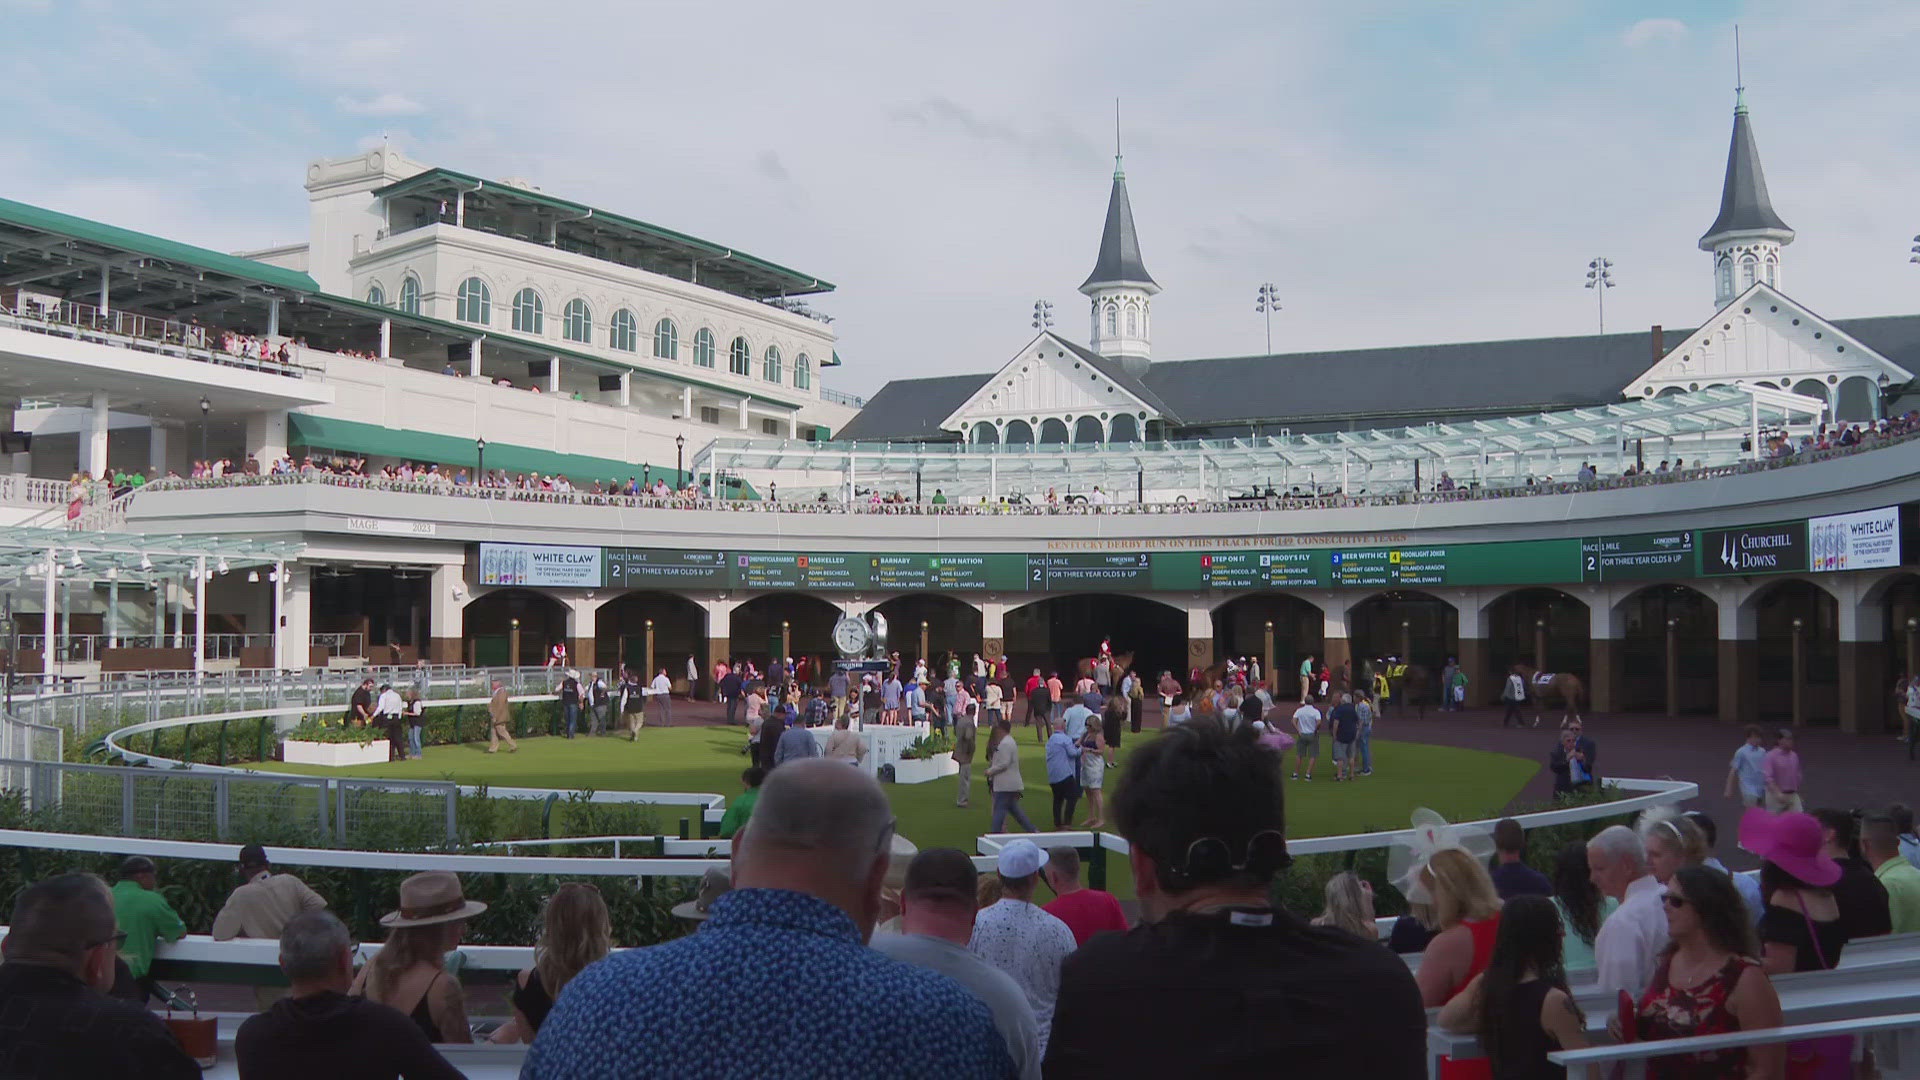 With the pageantry palpable, Louisville is set to mark its own major milestone with the 150th Kentucky Derby just days away.